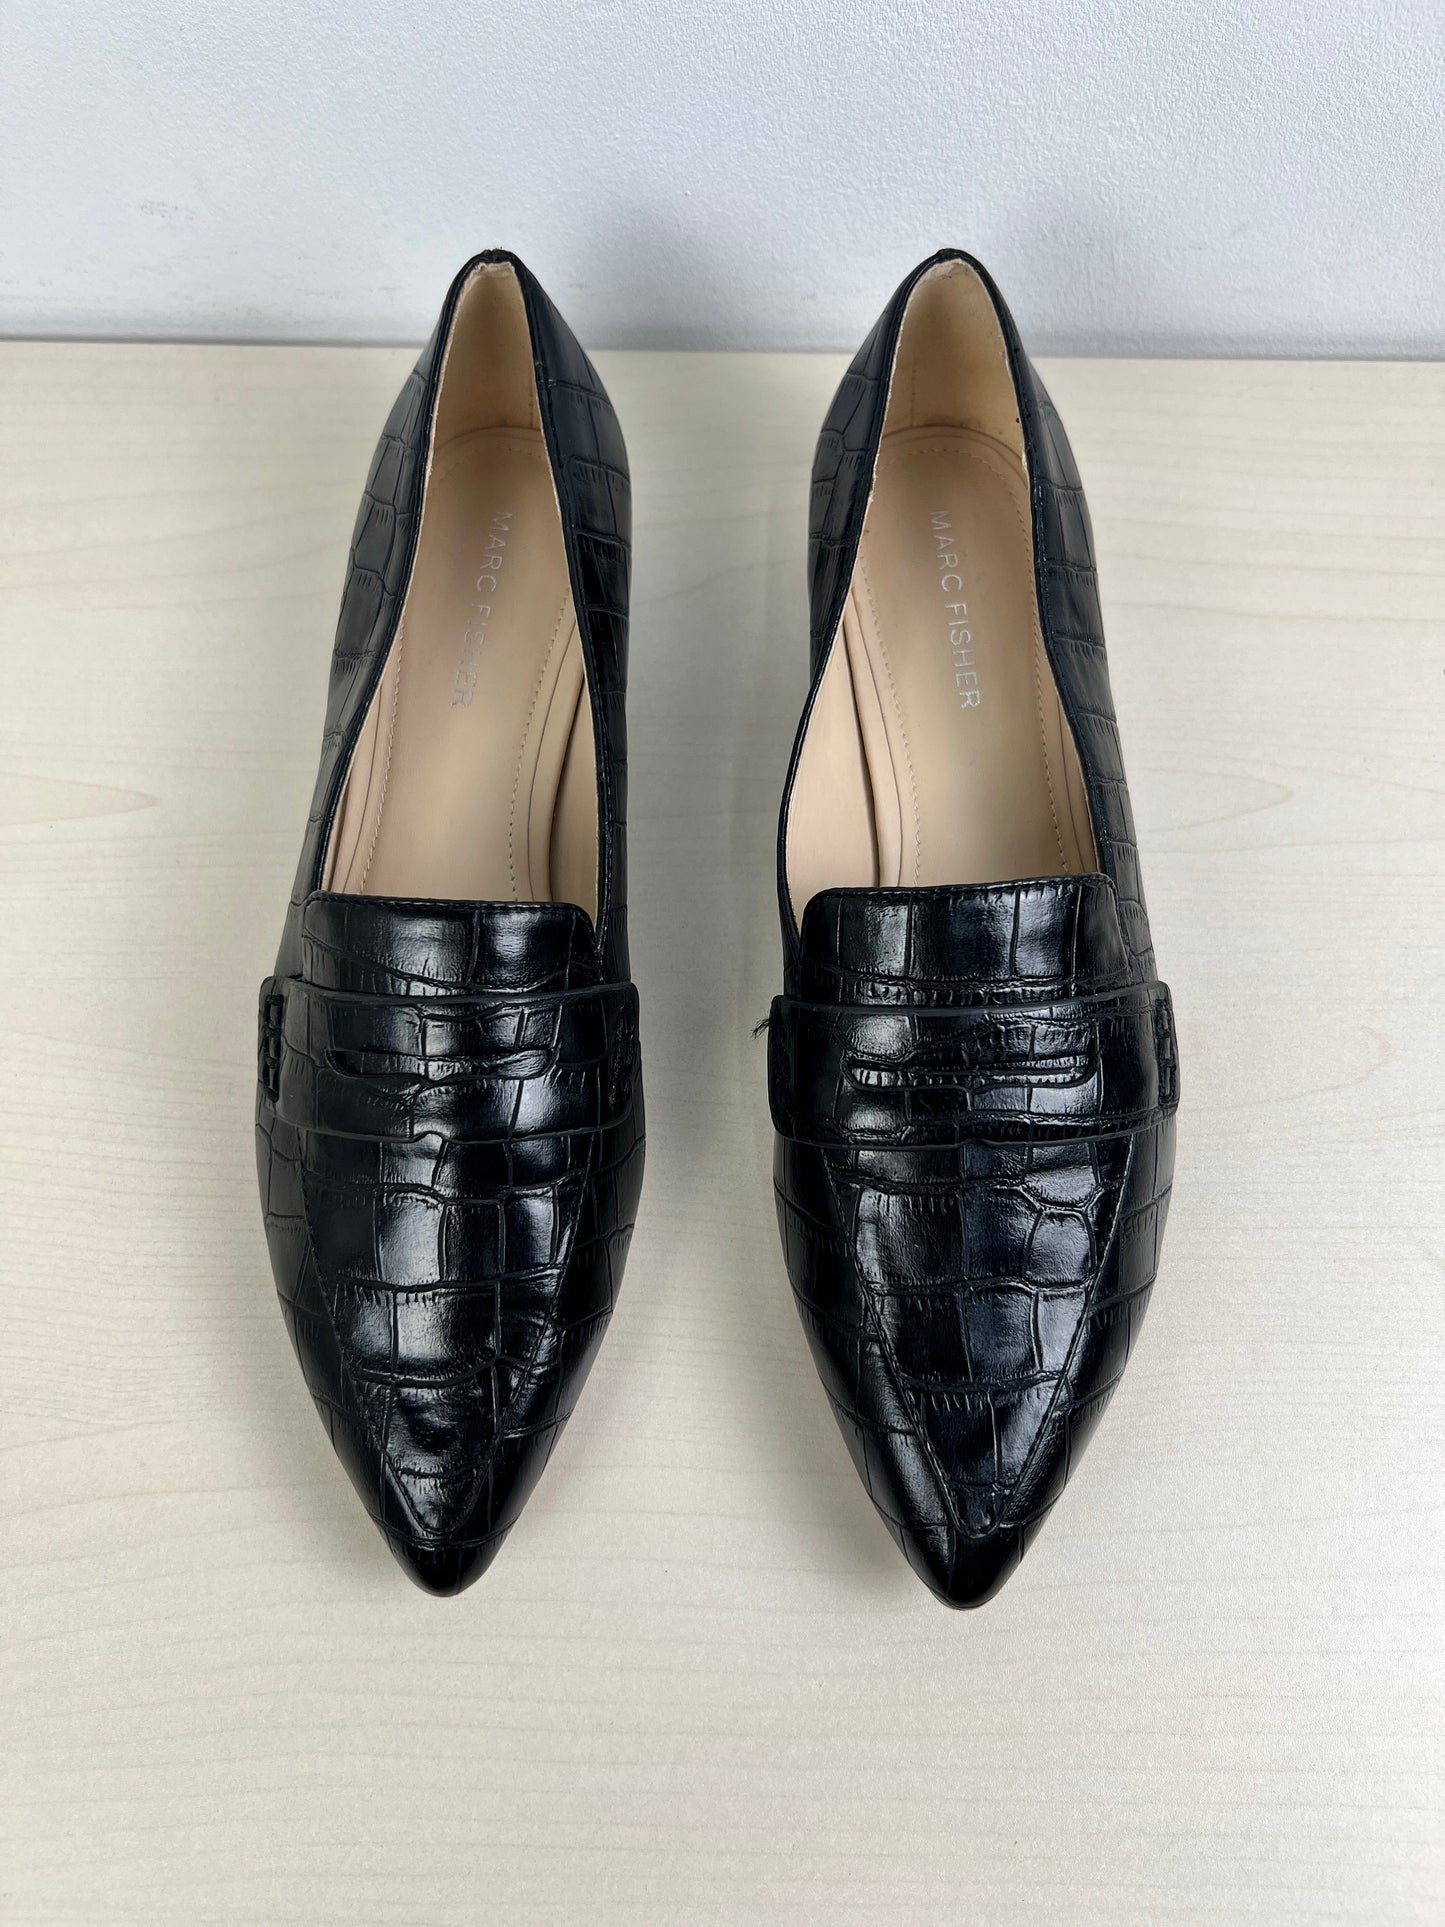 Black Shoes Flats Marc Fisher, Size 8